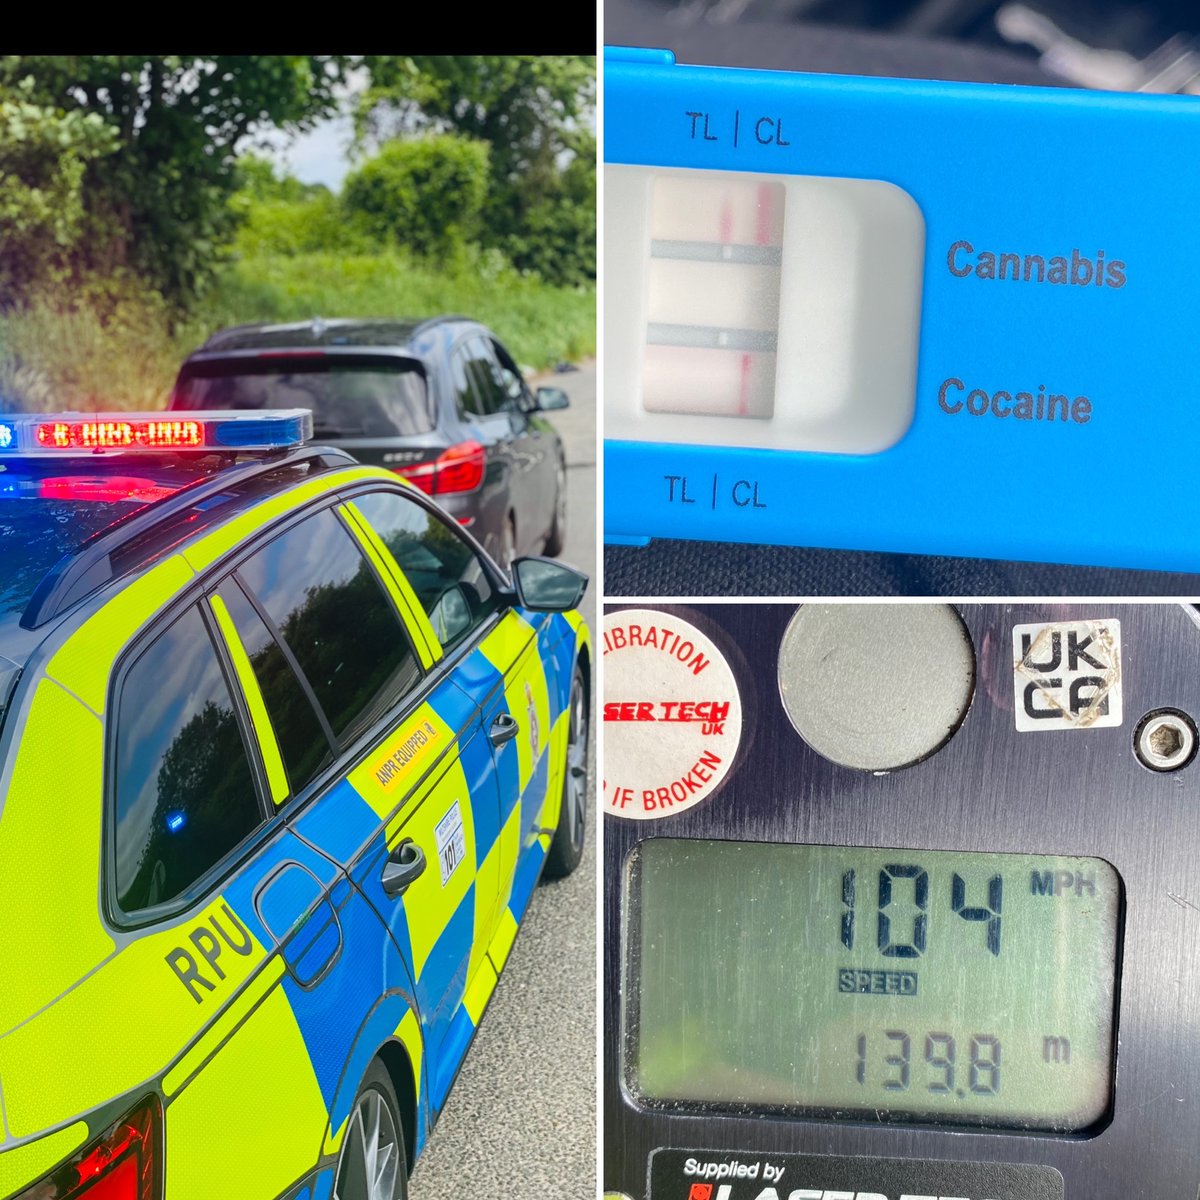 The chef was seen by #RPU on the A36 at Alderbury today. On stopping the driver it seems exotic salad was on the menu and the driver was #arrested on suspicion of drug driving. TOR issues for the speed #Fatal5